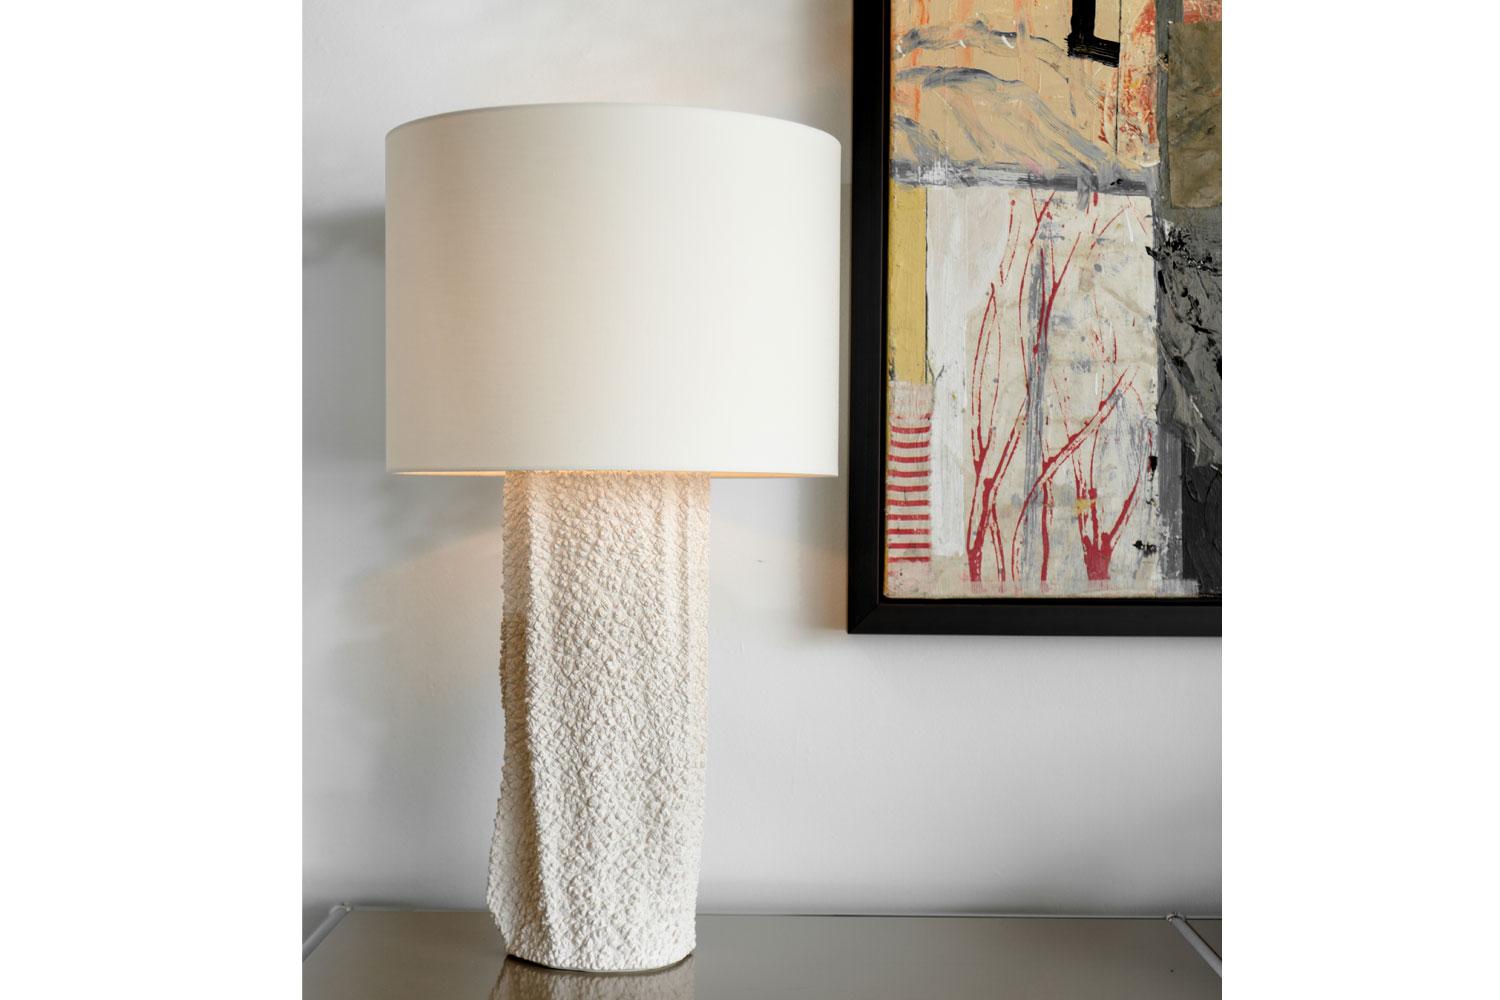 Modern Blush Colored Elephant Textured Ceramic Table Lamp with Linen Lamp Shade, Gilles